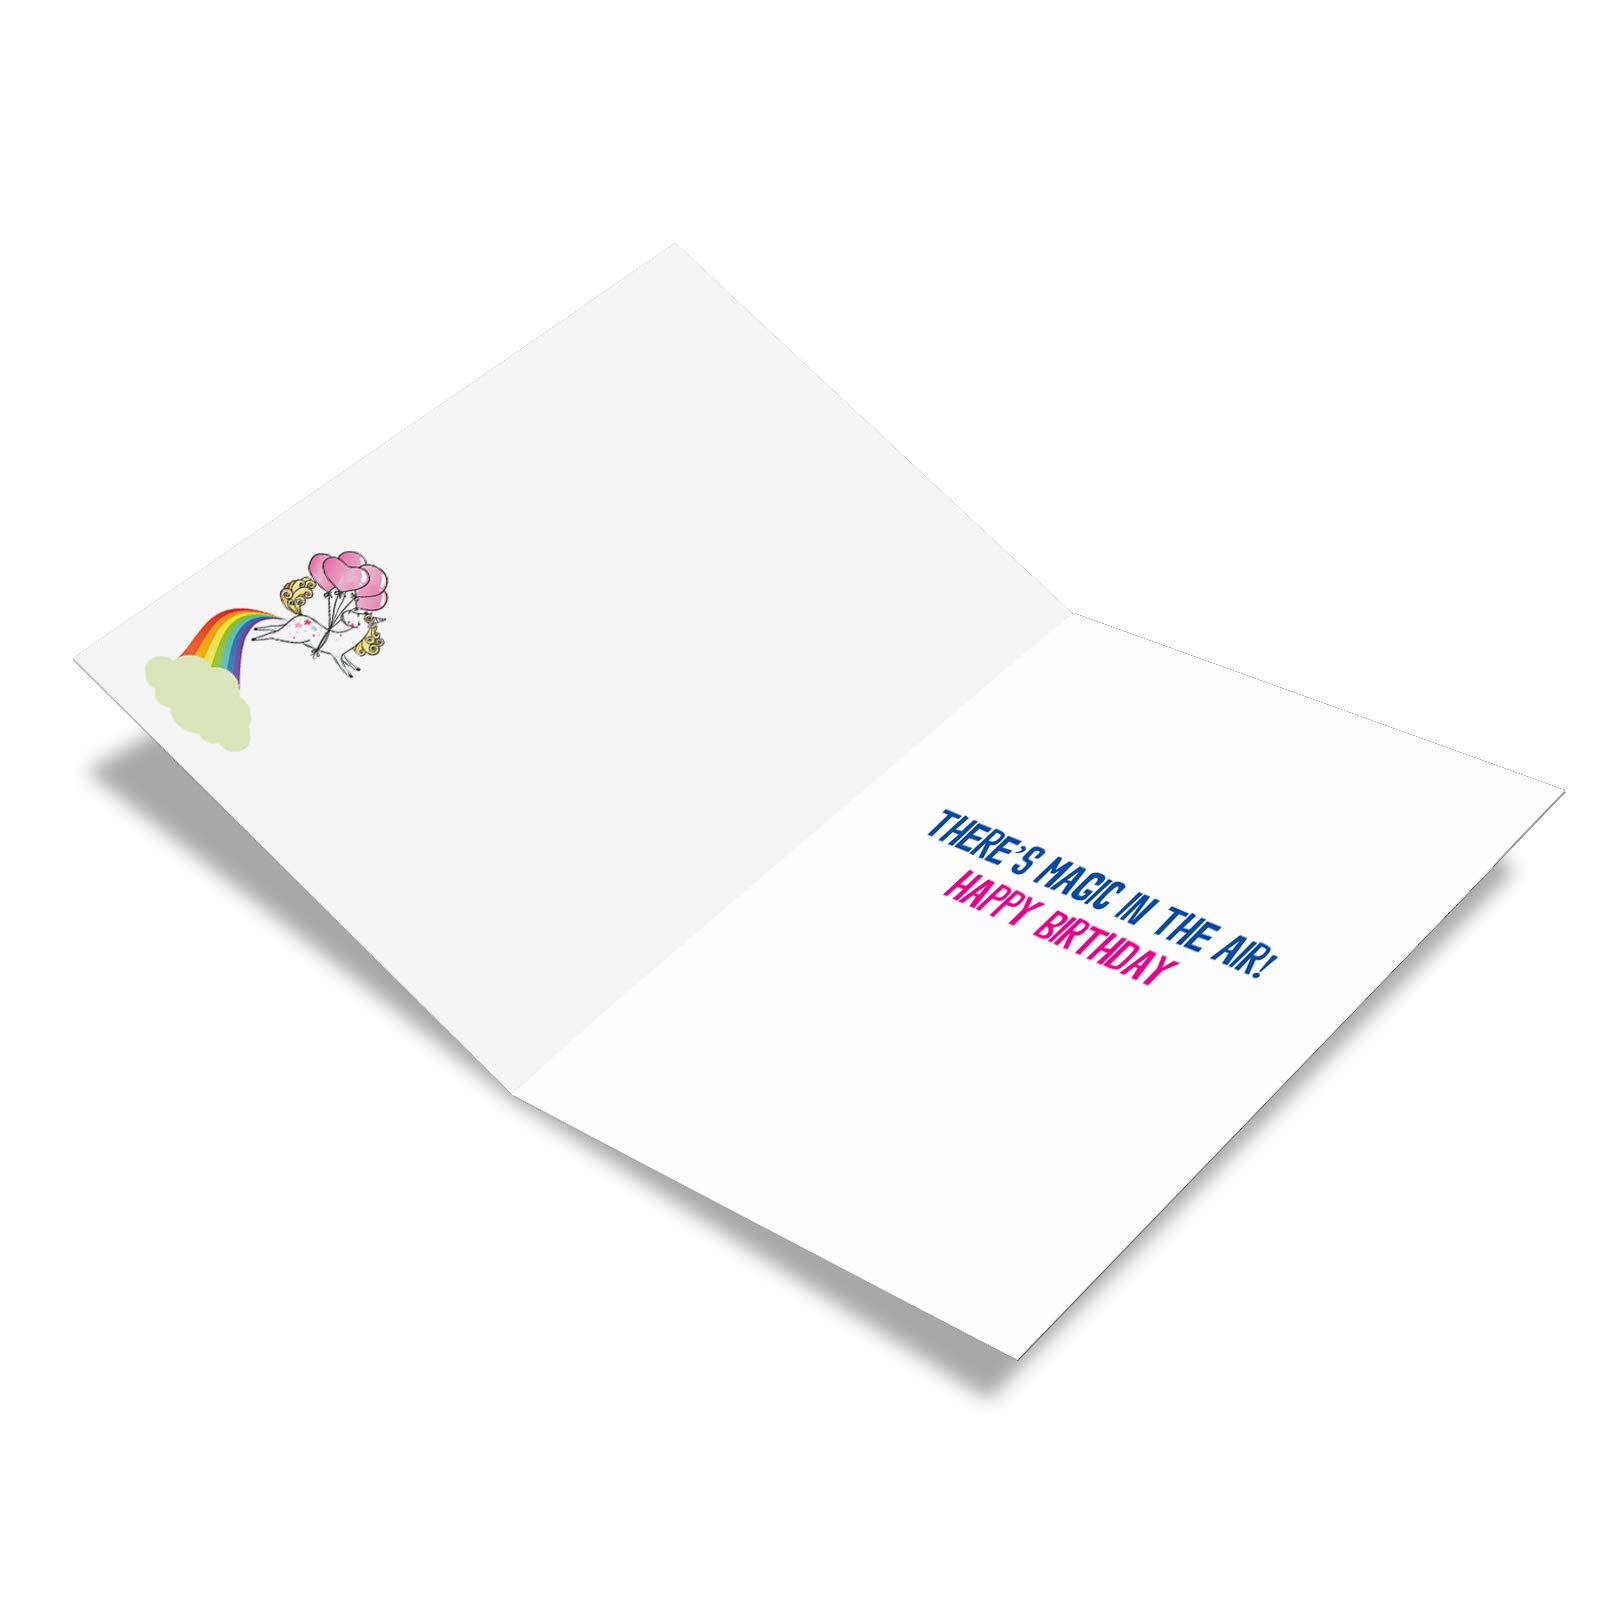 NobleWorks - Funny Happy Birthday Card with Envelope - Colorful Humor Card, Greeting Note - Unicorns and Rainbows C6892BDG